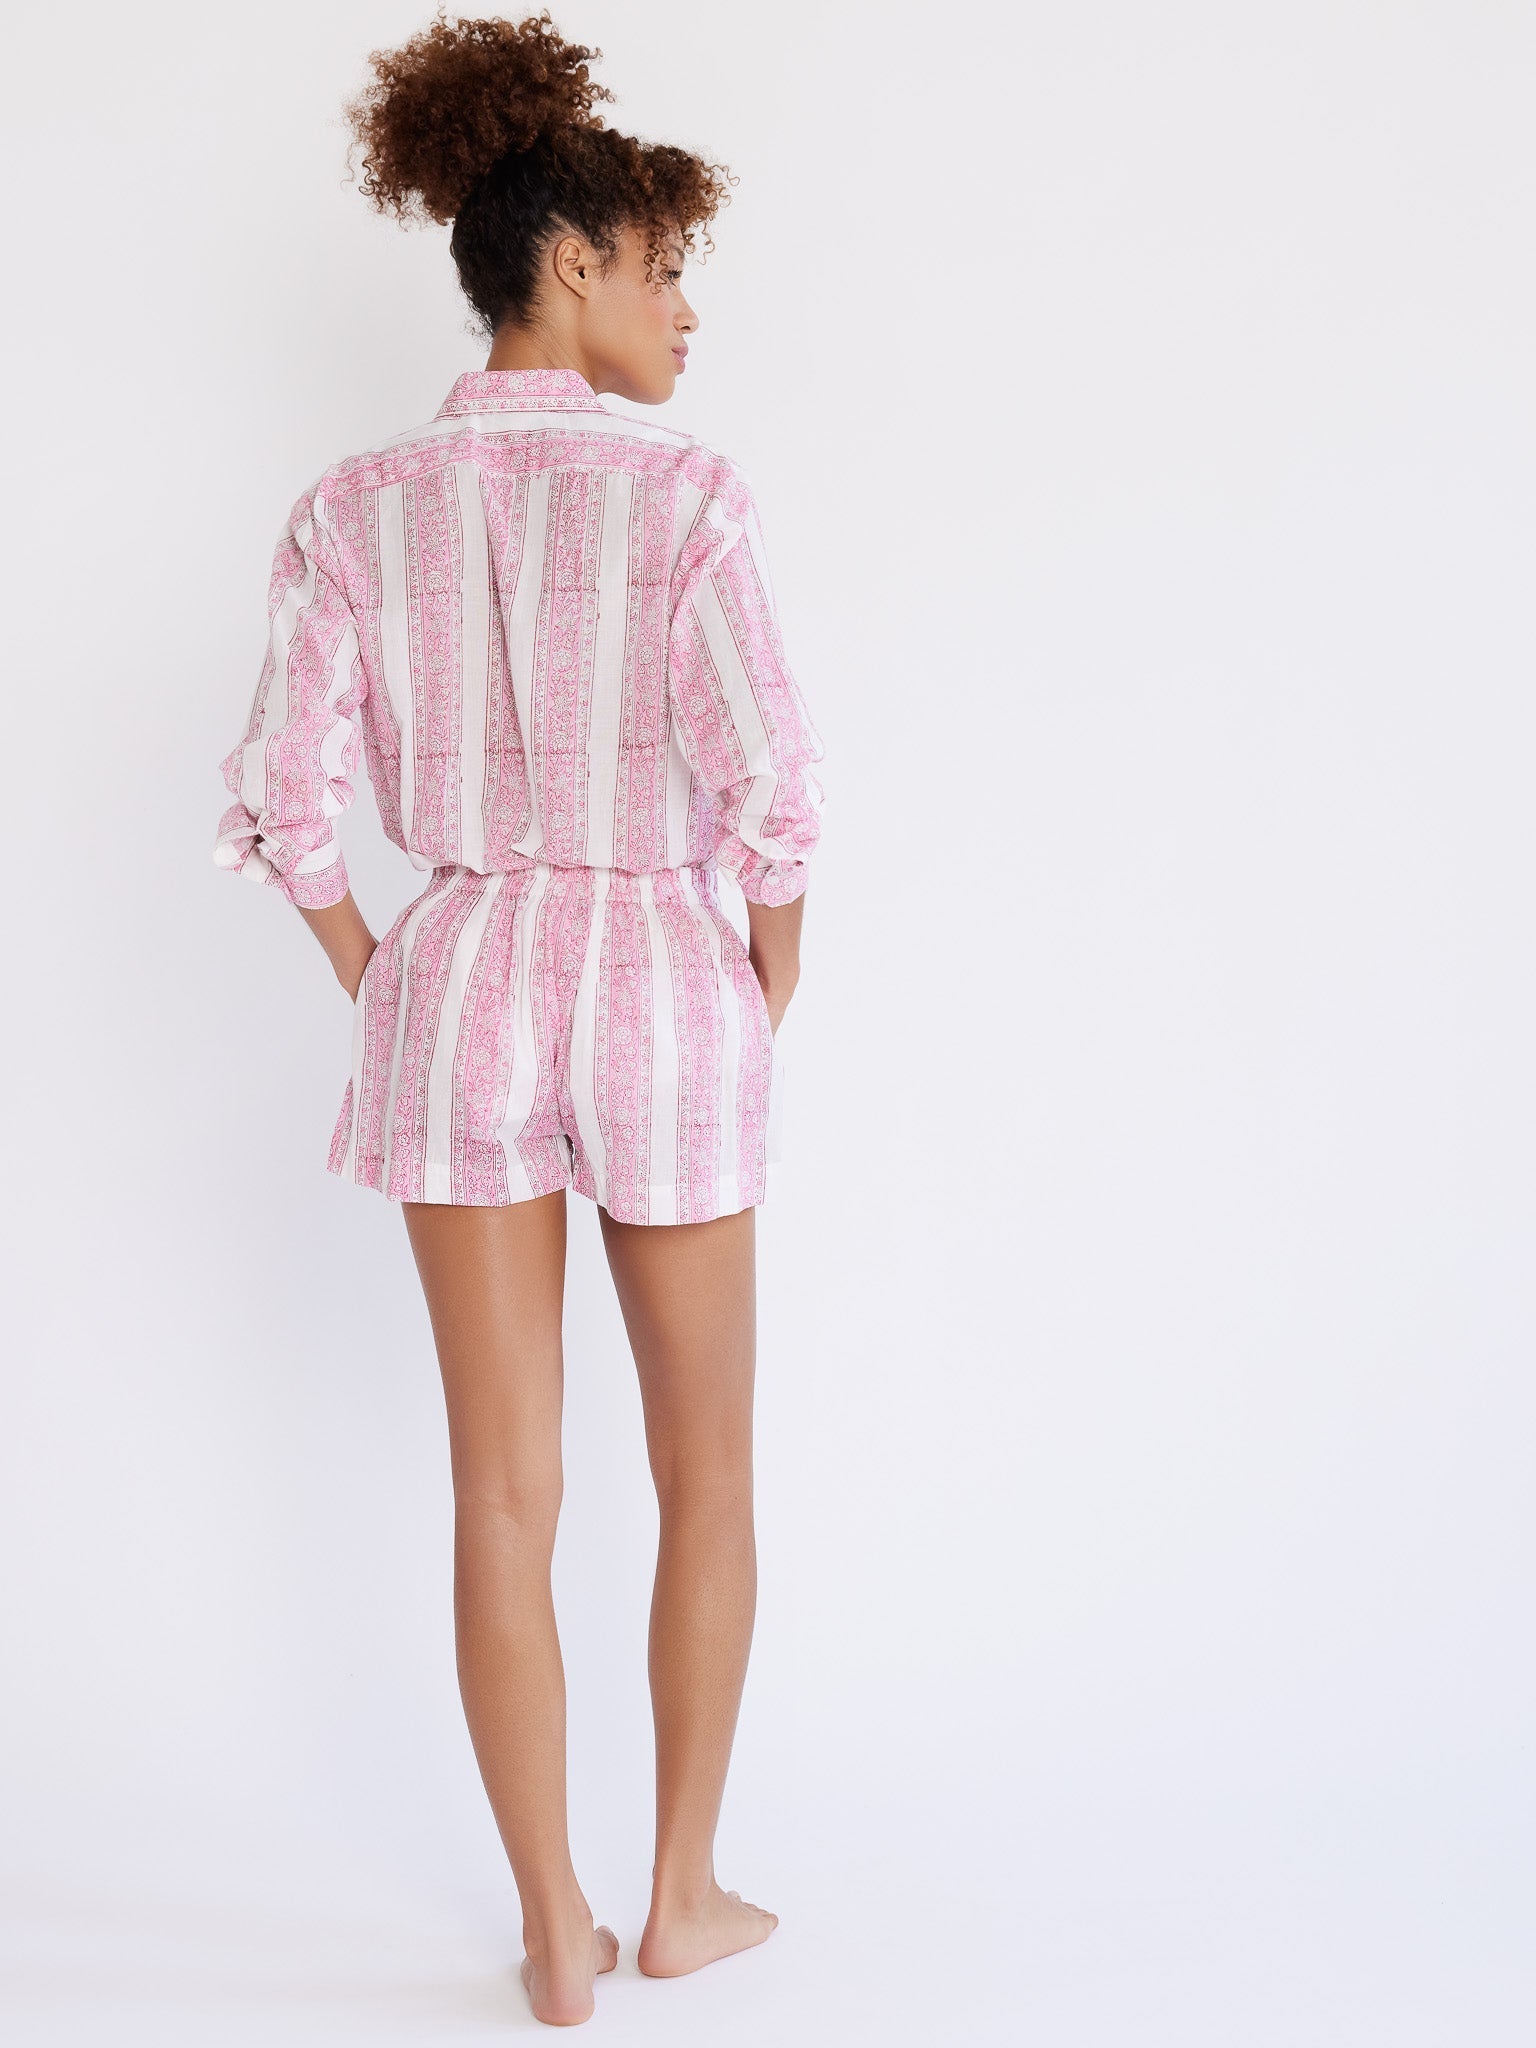 MILLE Clothing Cary Short in Jaipur Stripe